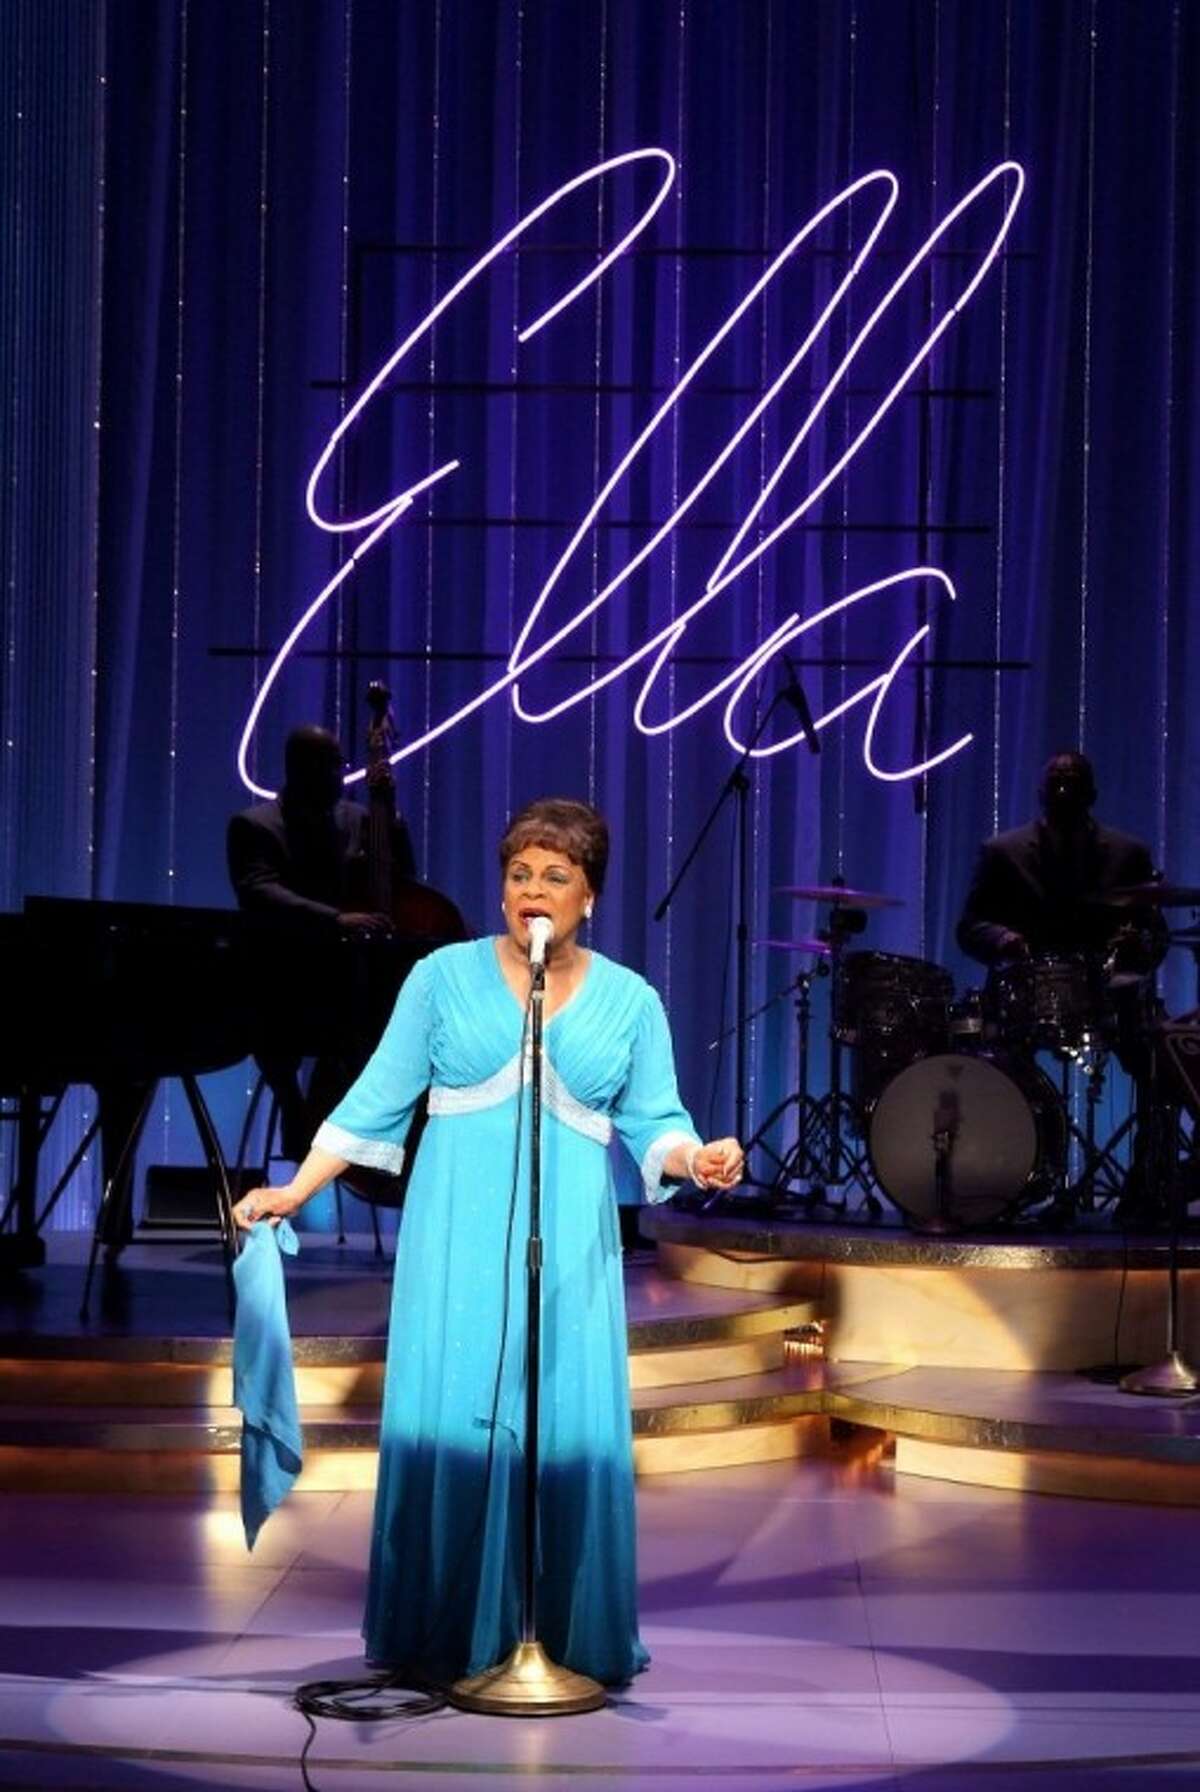 The life of jazz singer Ella Fitzgerald comes to the stage when the musical Ella, starring Broadway veteran Tina Fabrique, premieres in Houston Thursday, Feb. 17, and Friday, Feb. 18, at 8 p.m. in the Wortham Center’s Cullen Theater.